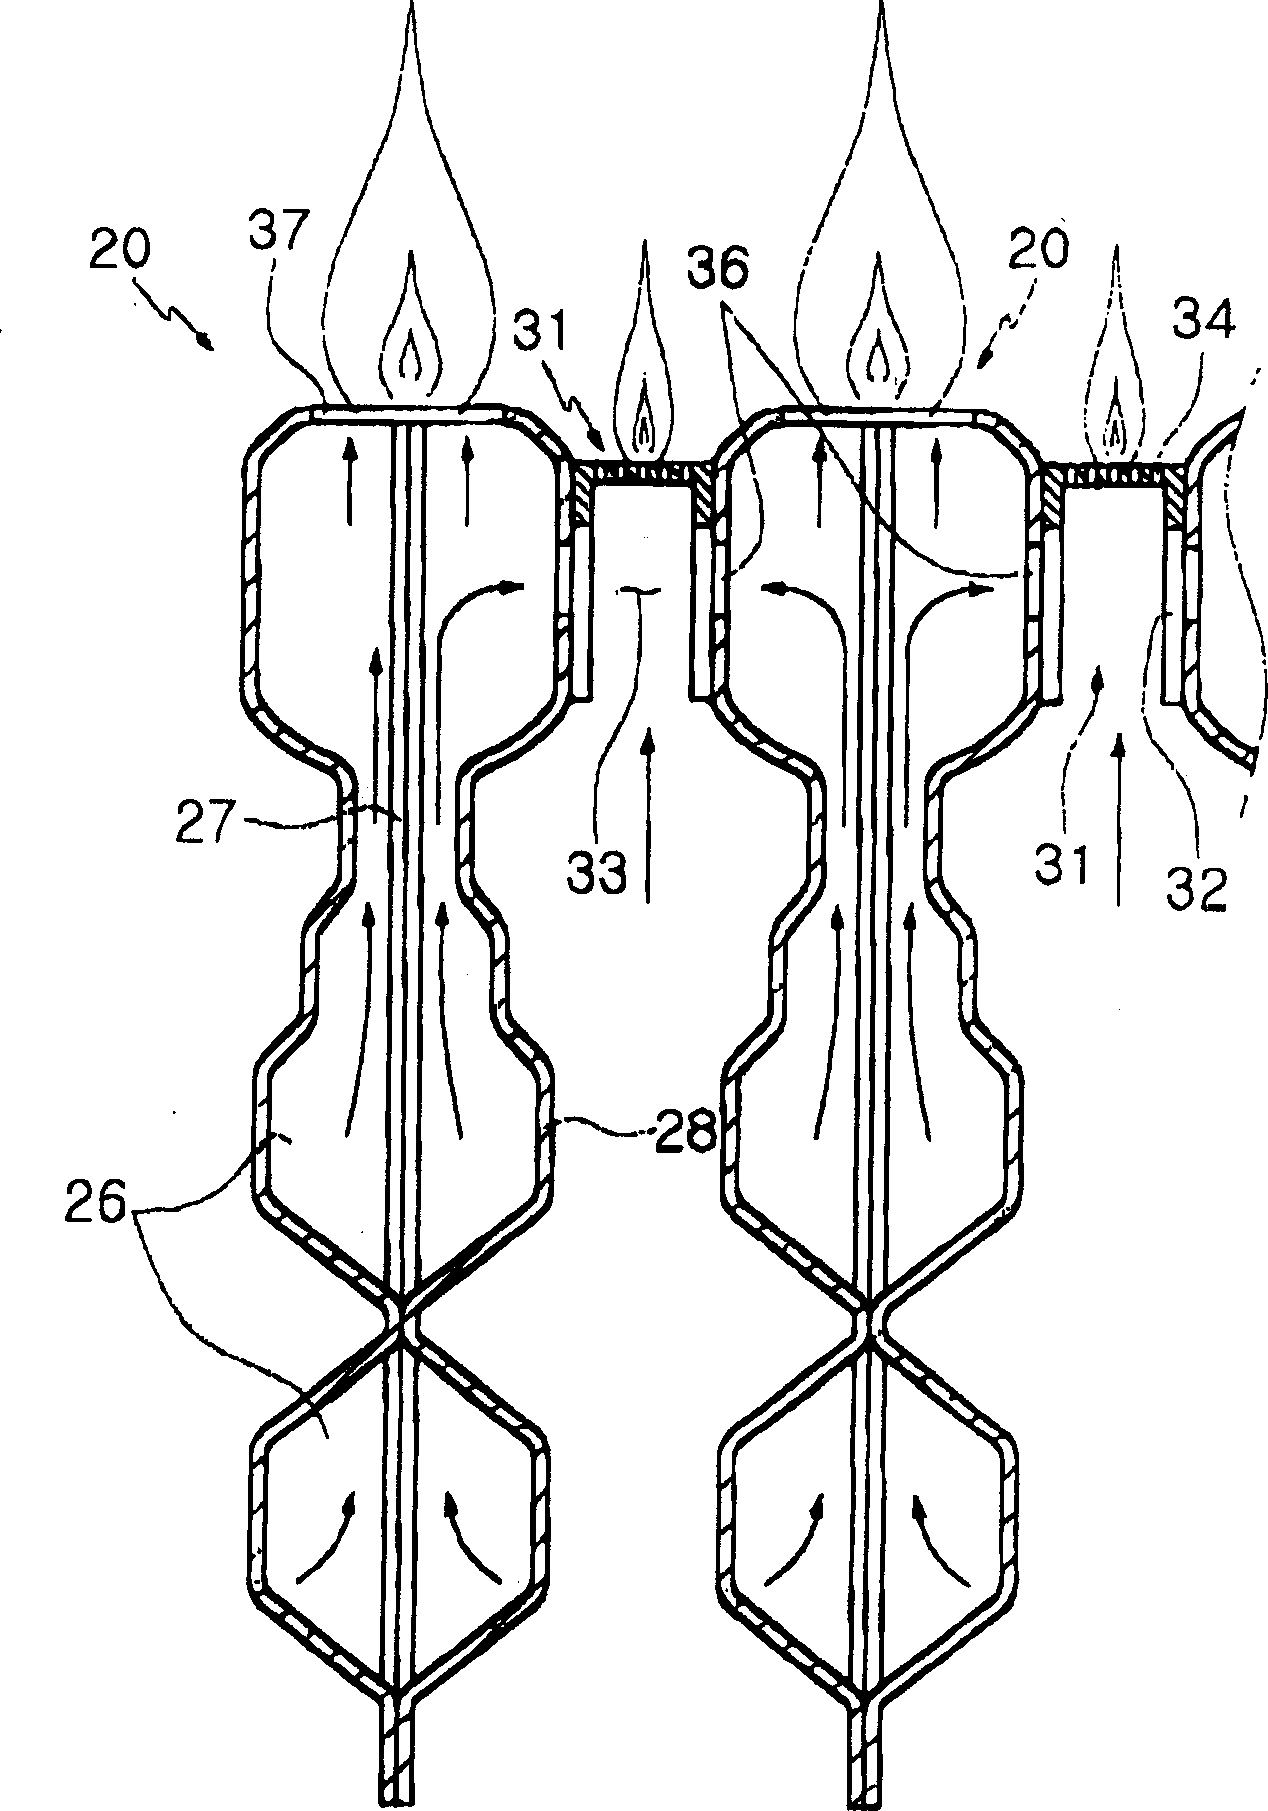 Gas burner with space by mixing gas fuel with sucked air